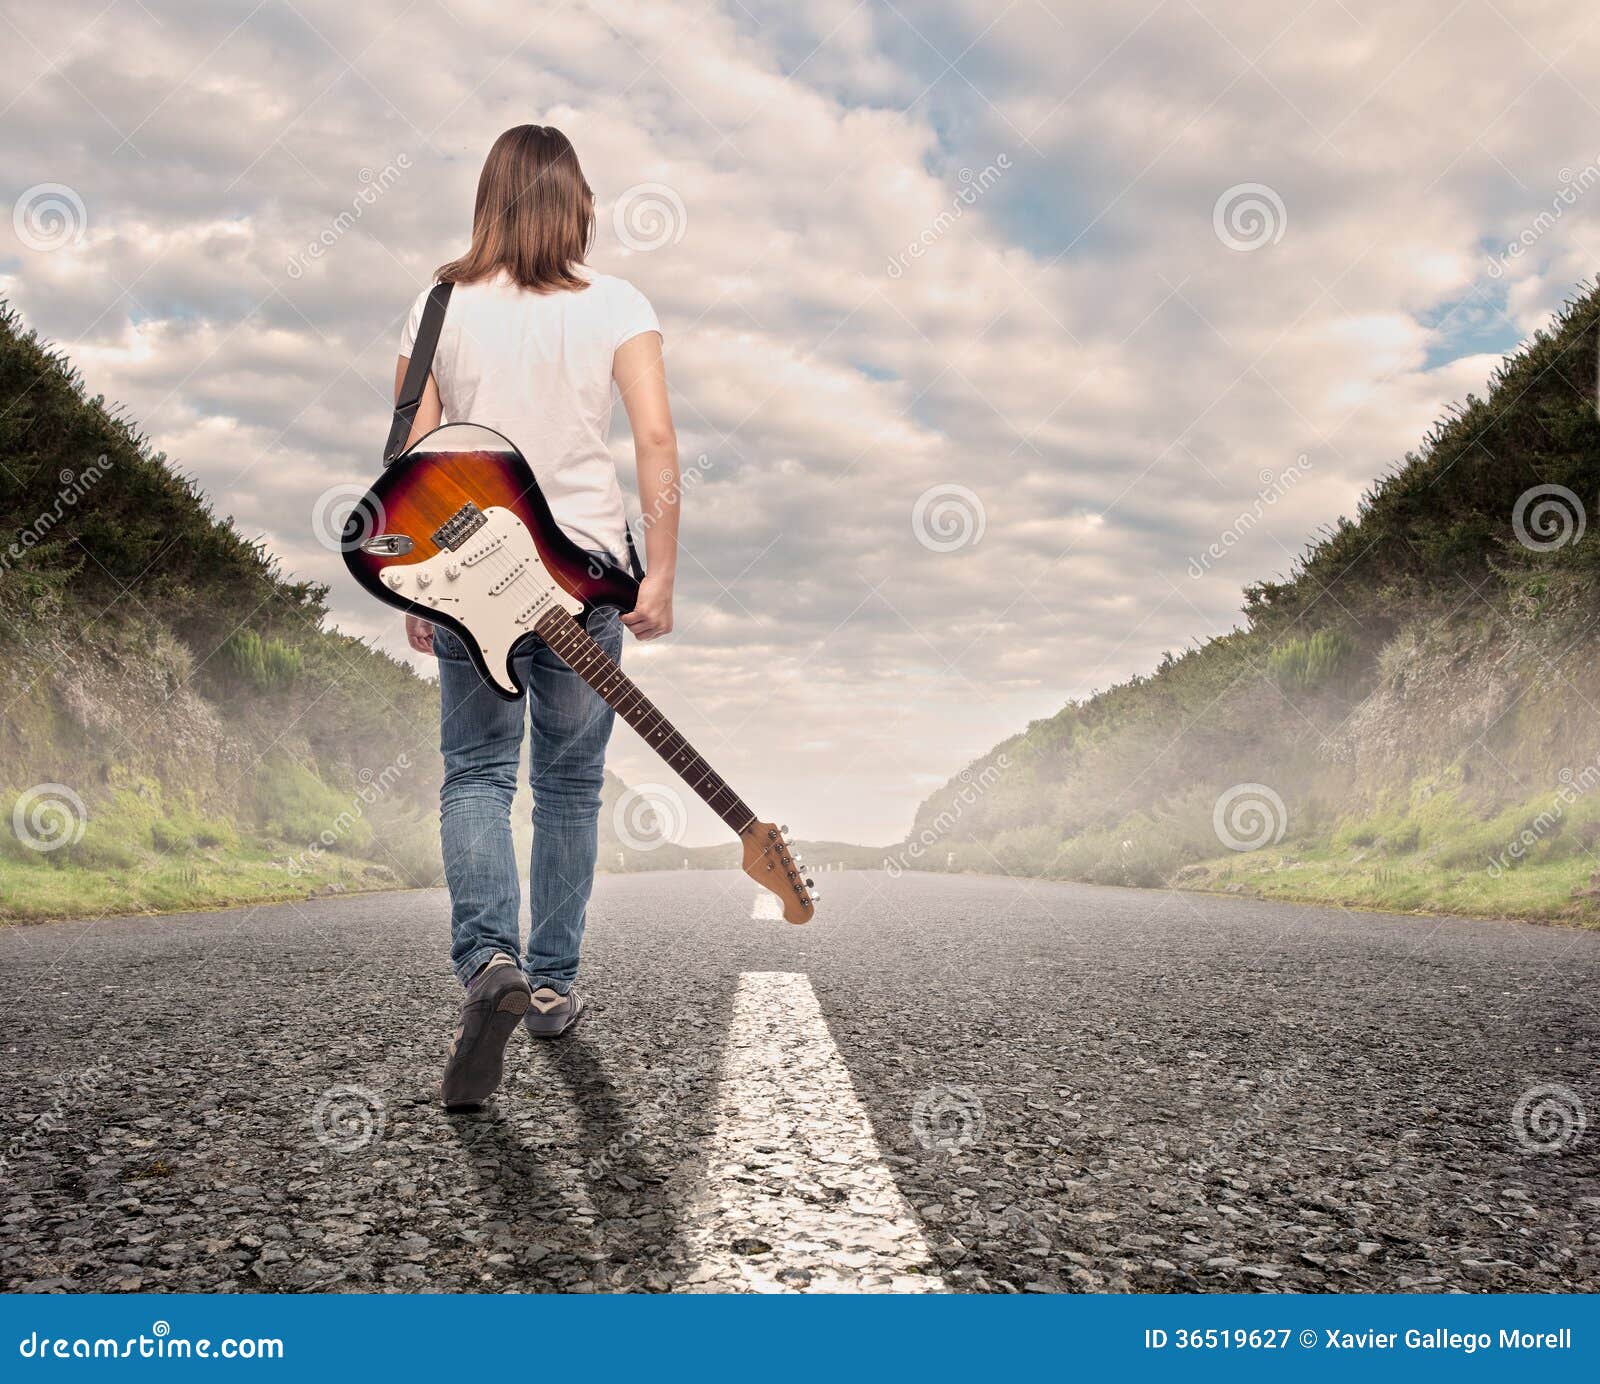 young musician woman walking on a road